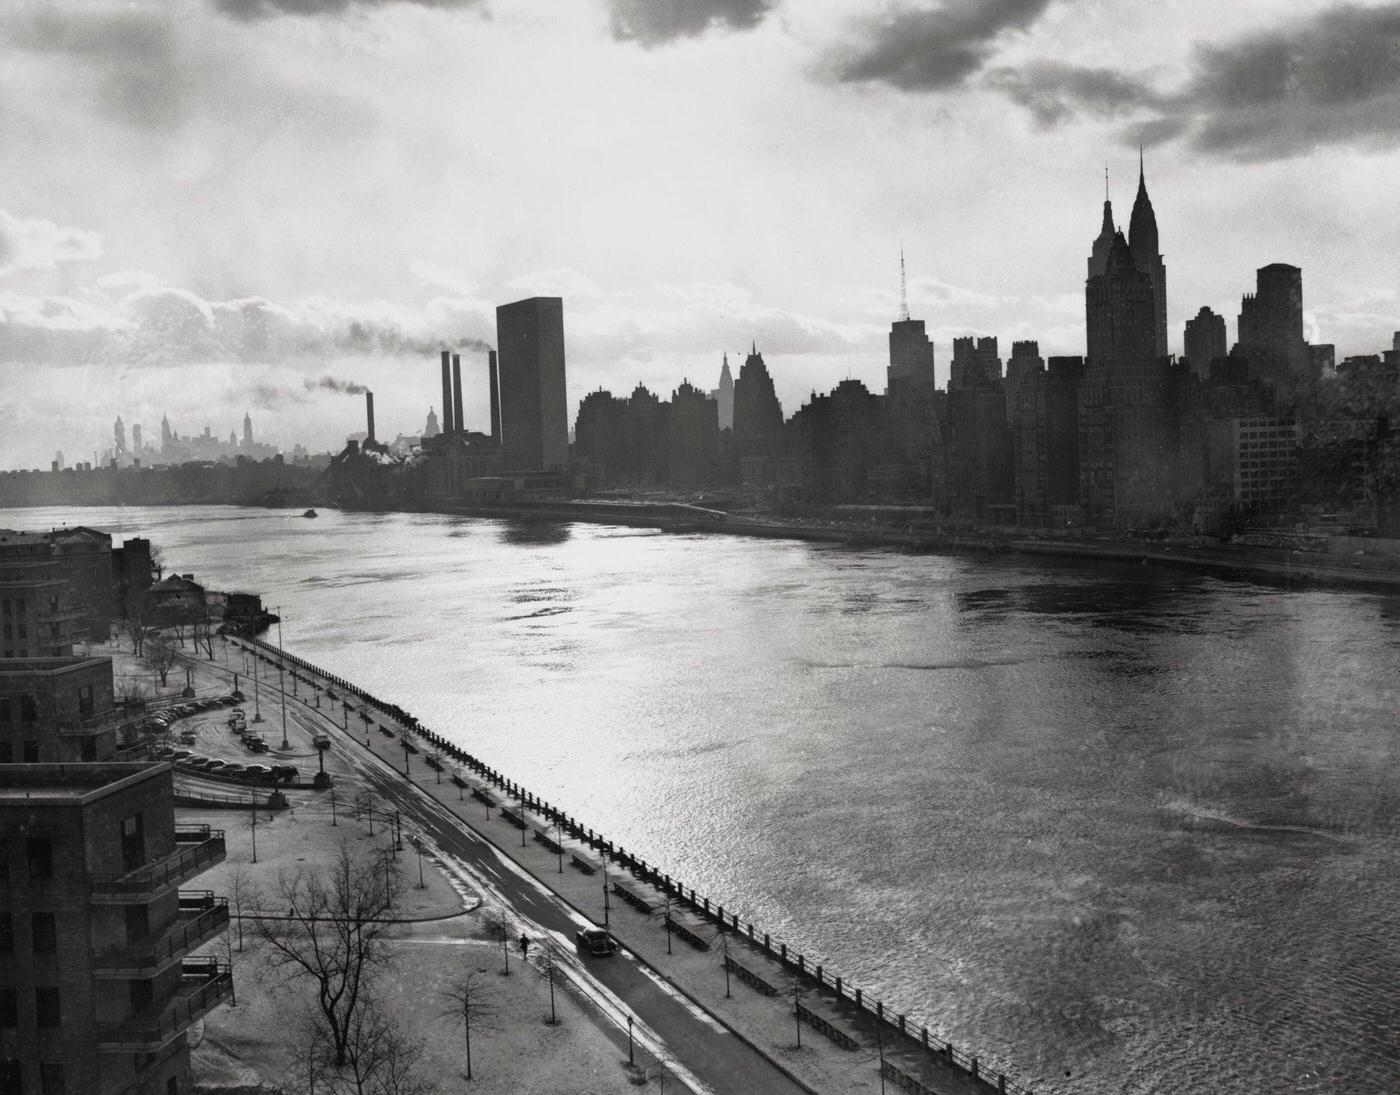 East River, New York City: Evening Falls Over The East River With Manhattan Skyline, 1951.